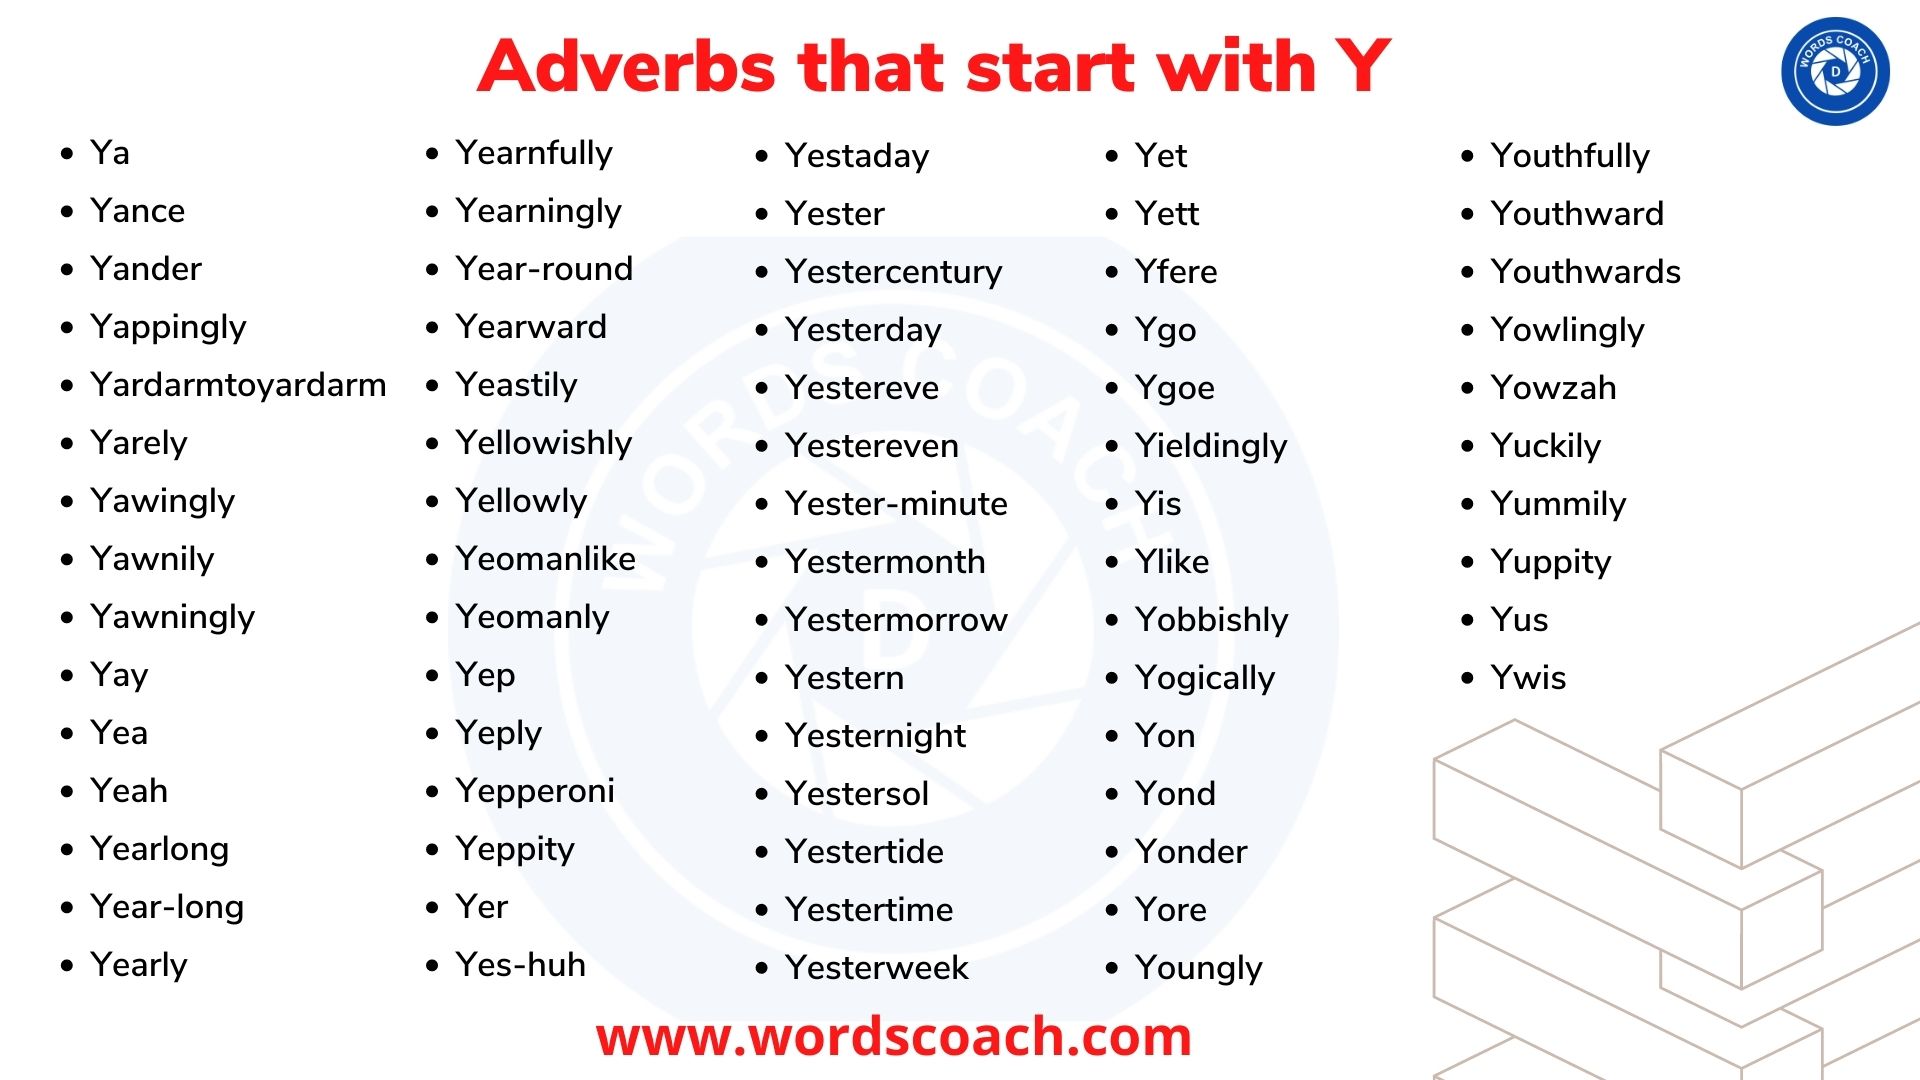 Adverbs that start with Y - wordscoach.com